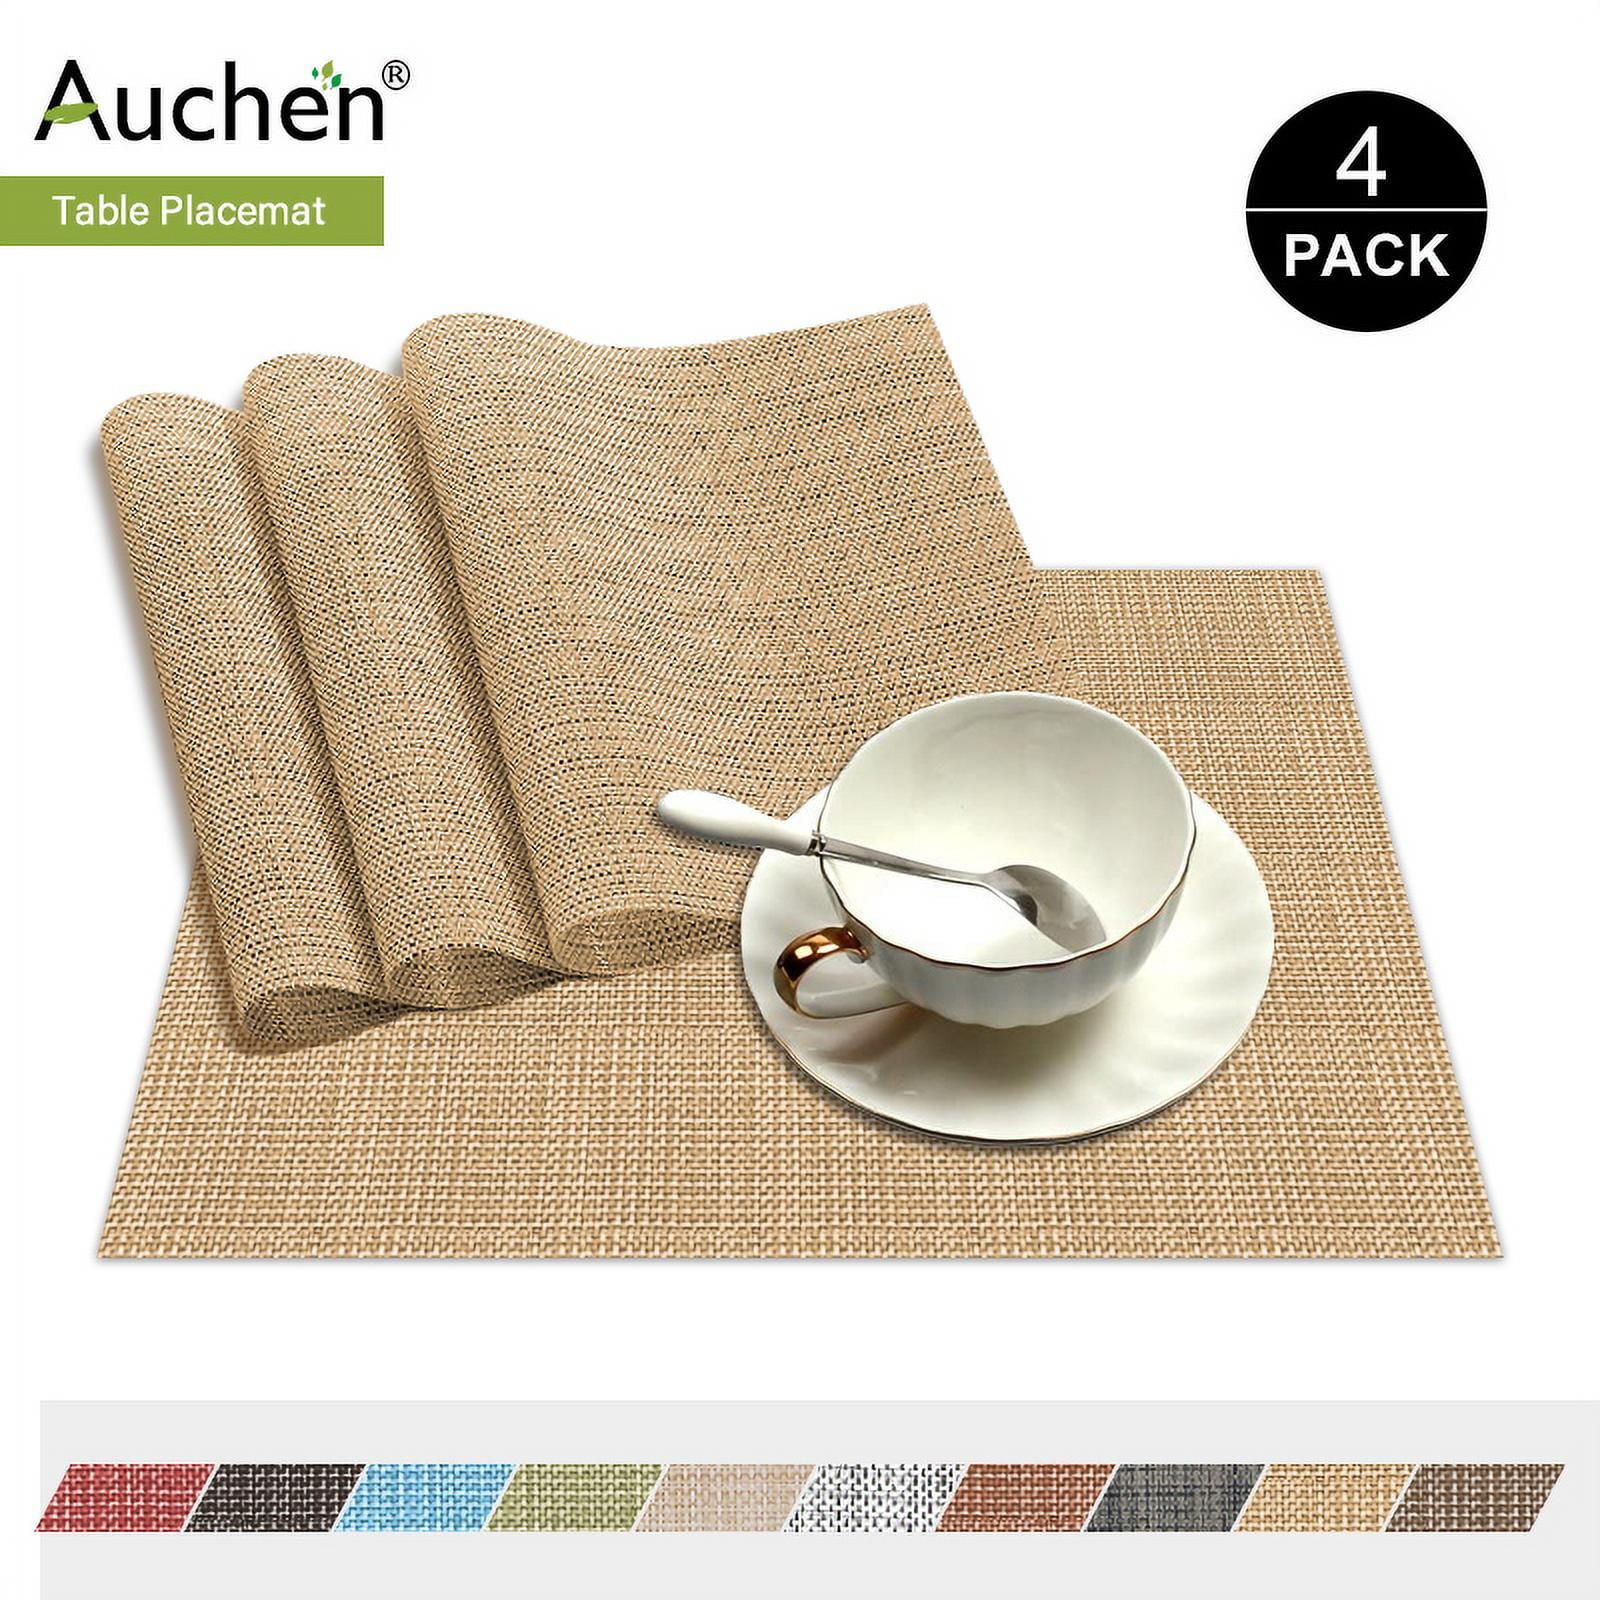 Solid Linen Placemat, Set of 4 - Beige | The Company Store